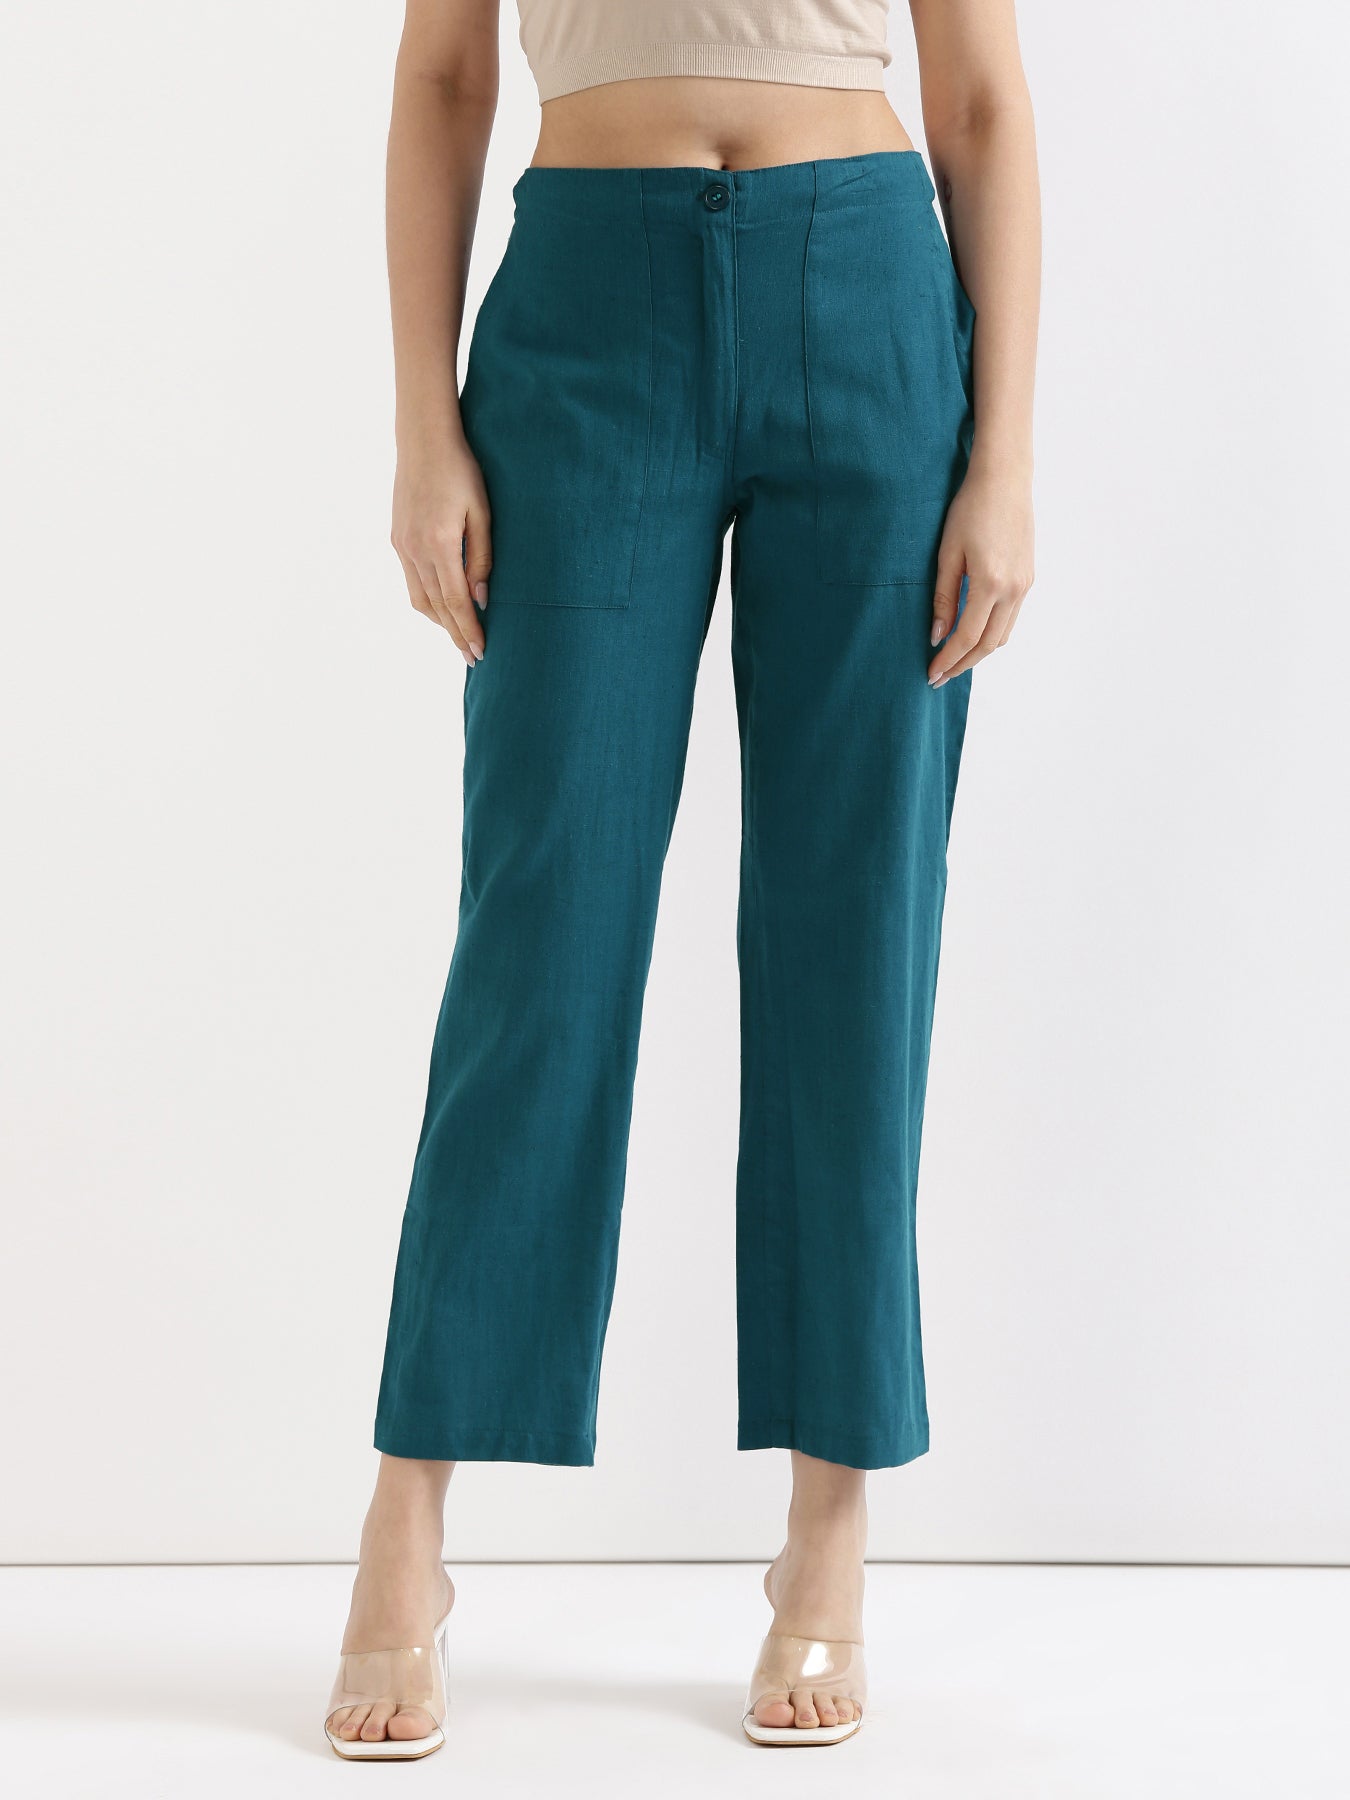 Turquoise Airy Linen Pants